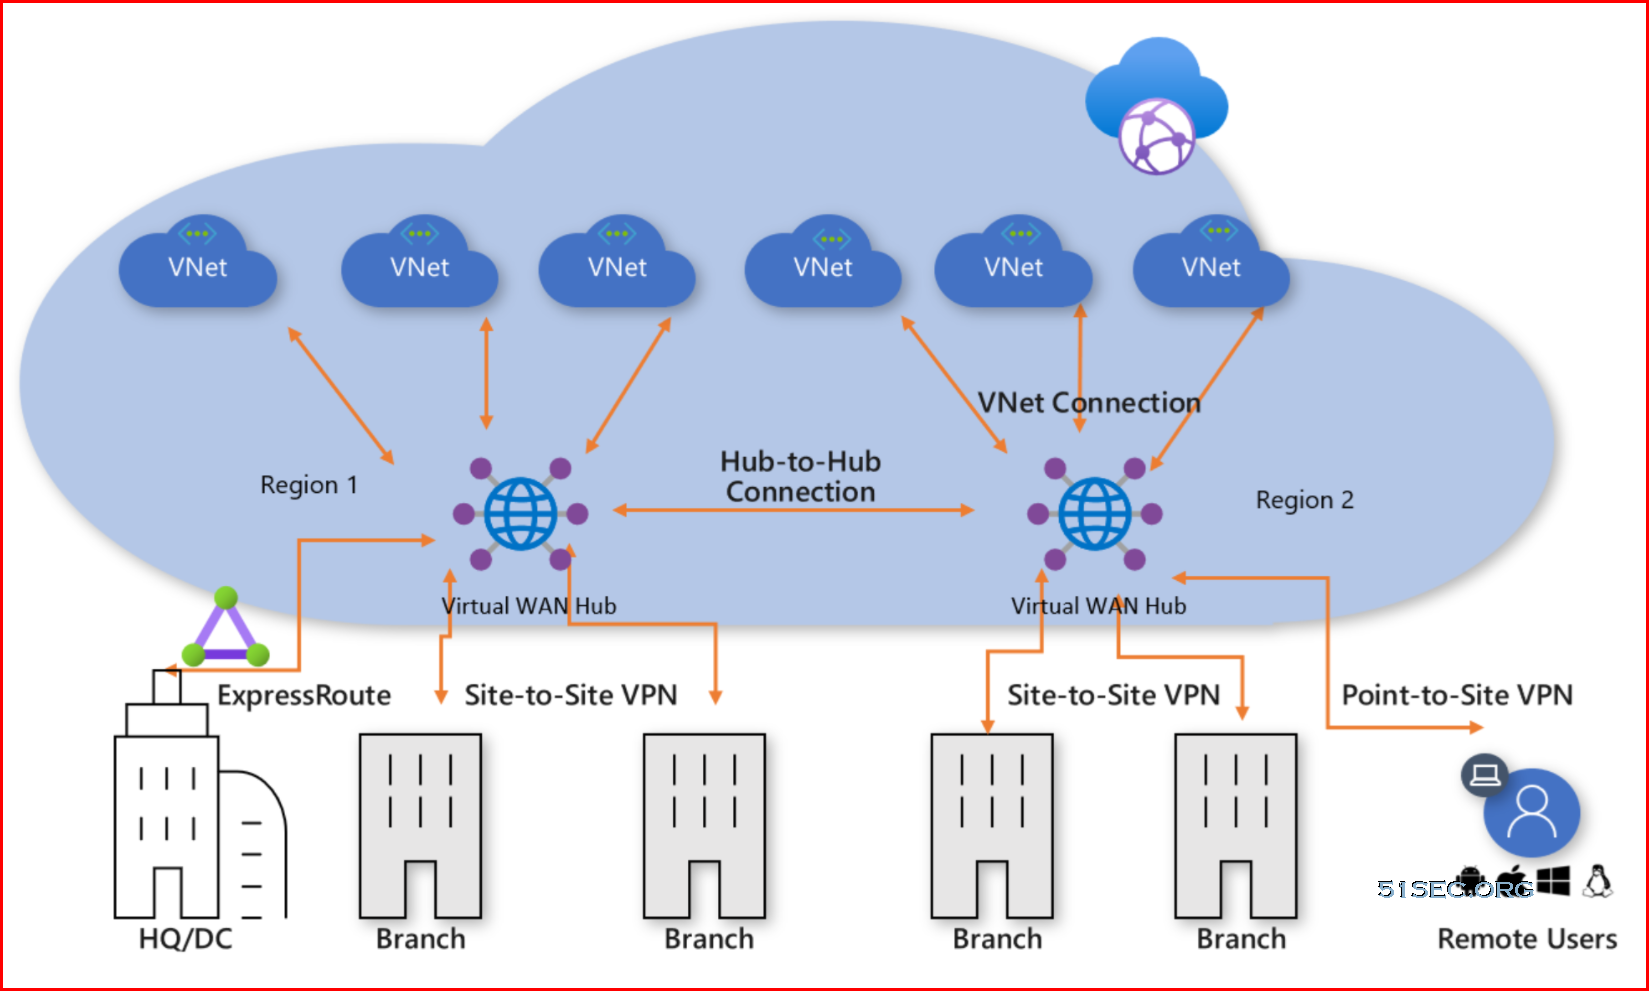 Azure Point-to-Site VPN Configuration (Using Certs or AD Authentication)